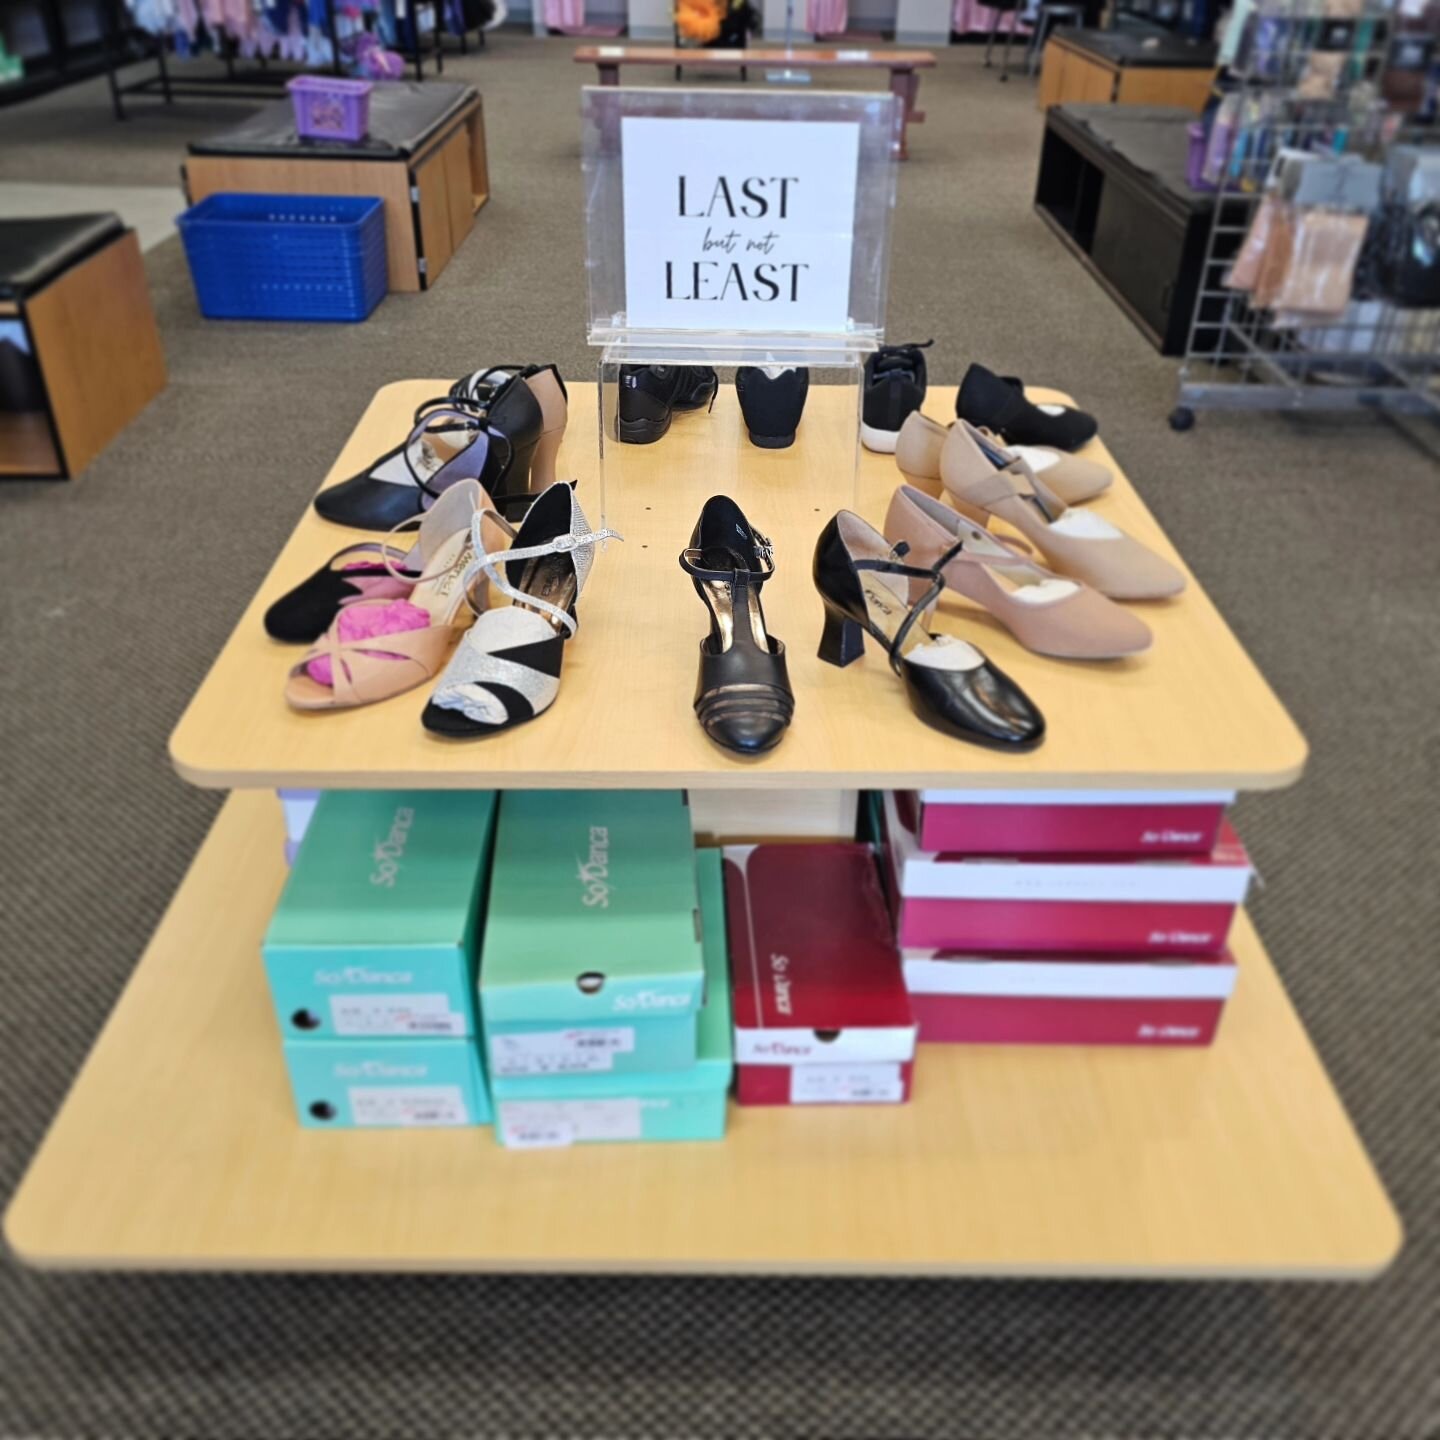 For the last time ever at New Mexico Dancewear. . .

The &quot;Last But Not Last&quot; shoes on our center table are marked down and not coming back. Limited sizing and quantities available. Up to 50% off.

 #NMDancewear #dance #dancewear
#ballet #ja